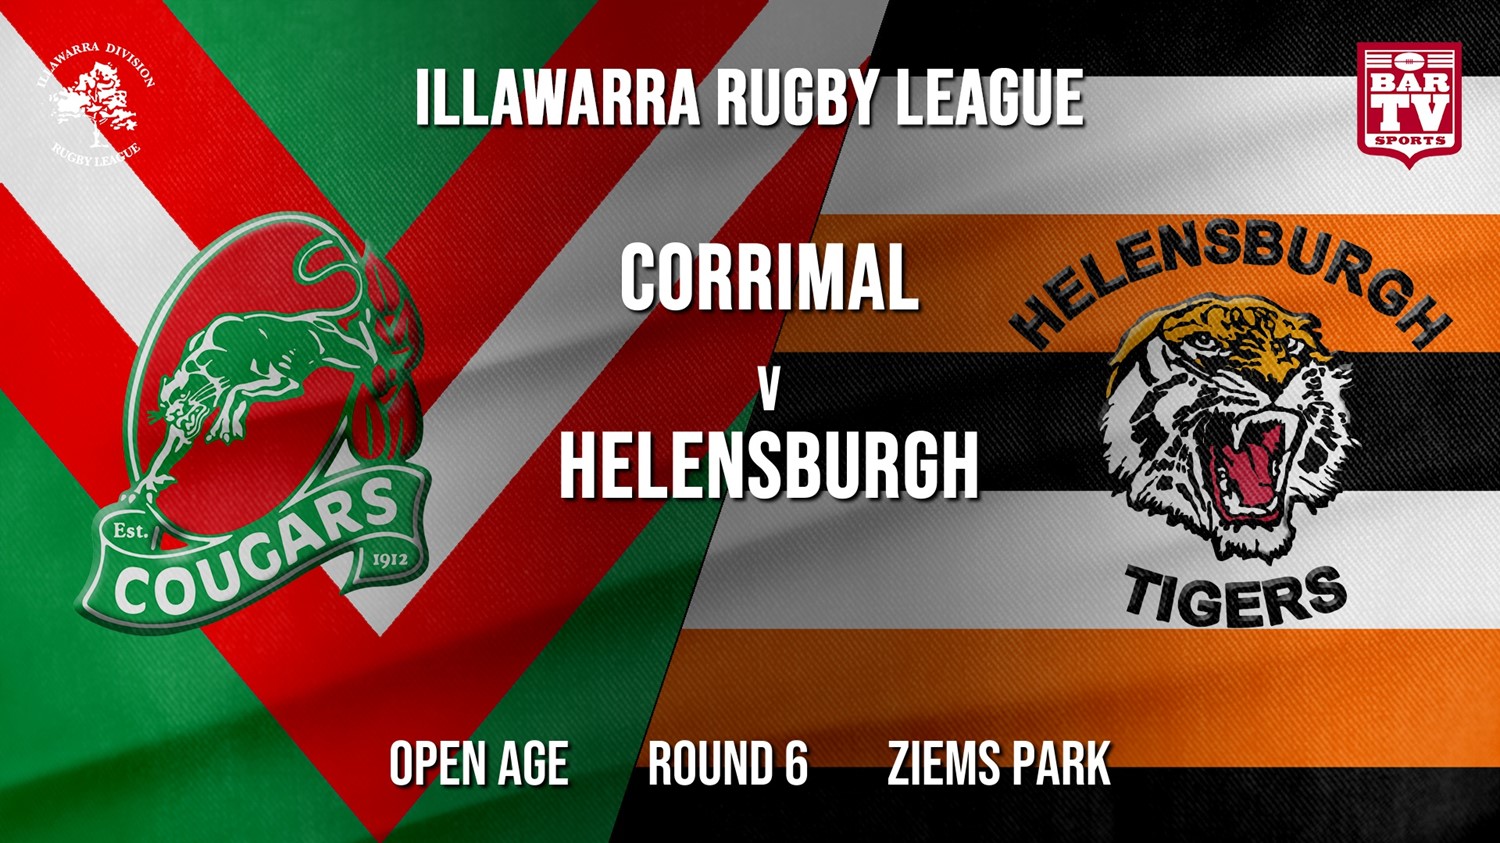 IRL Round 6 - Open Age - Corrimal Cougars v Helensburgh Tigers Minigame Slate Image